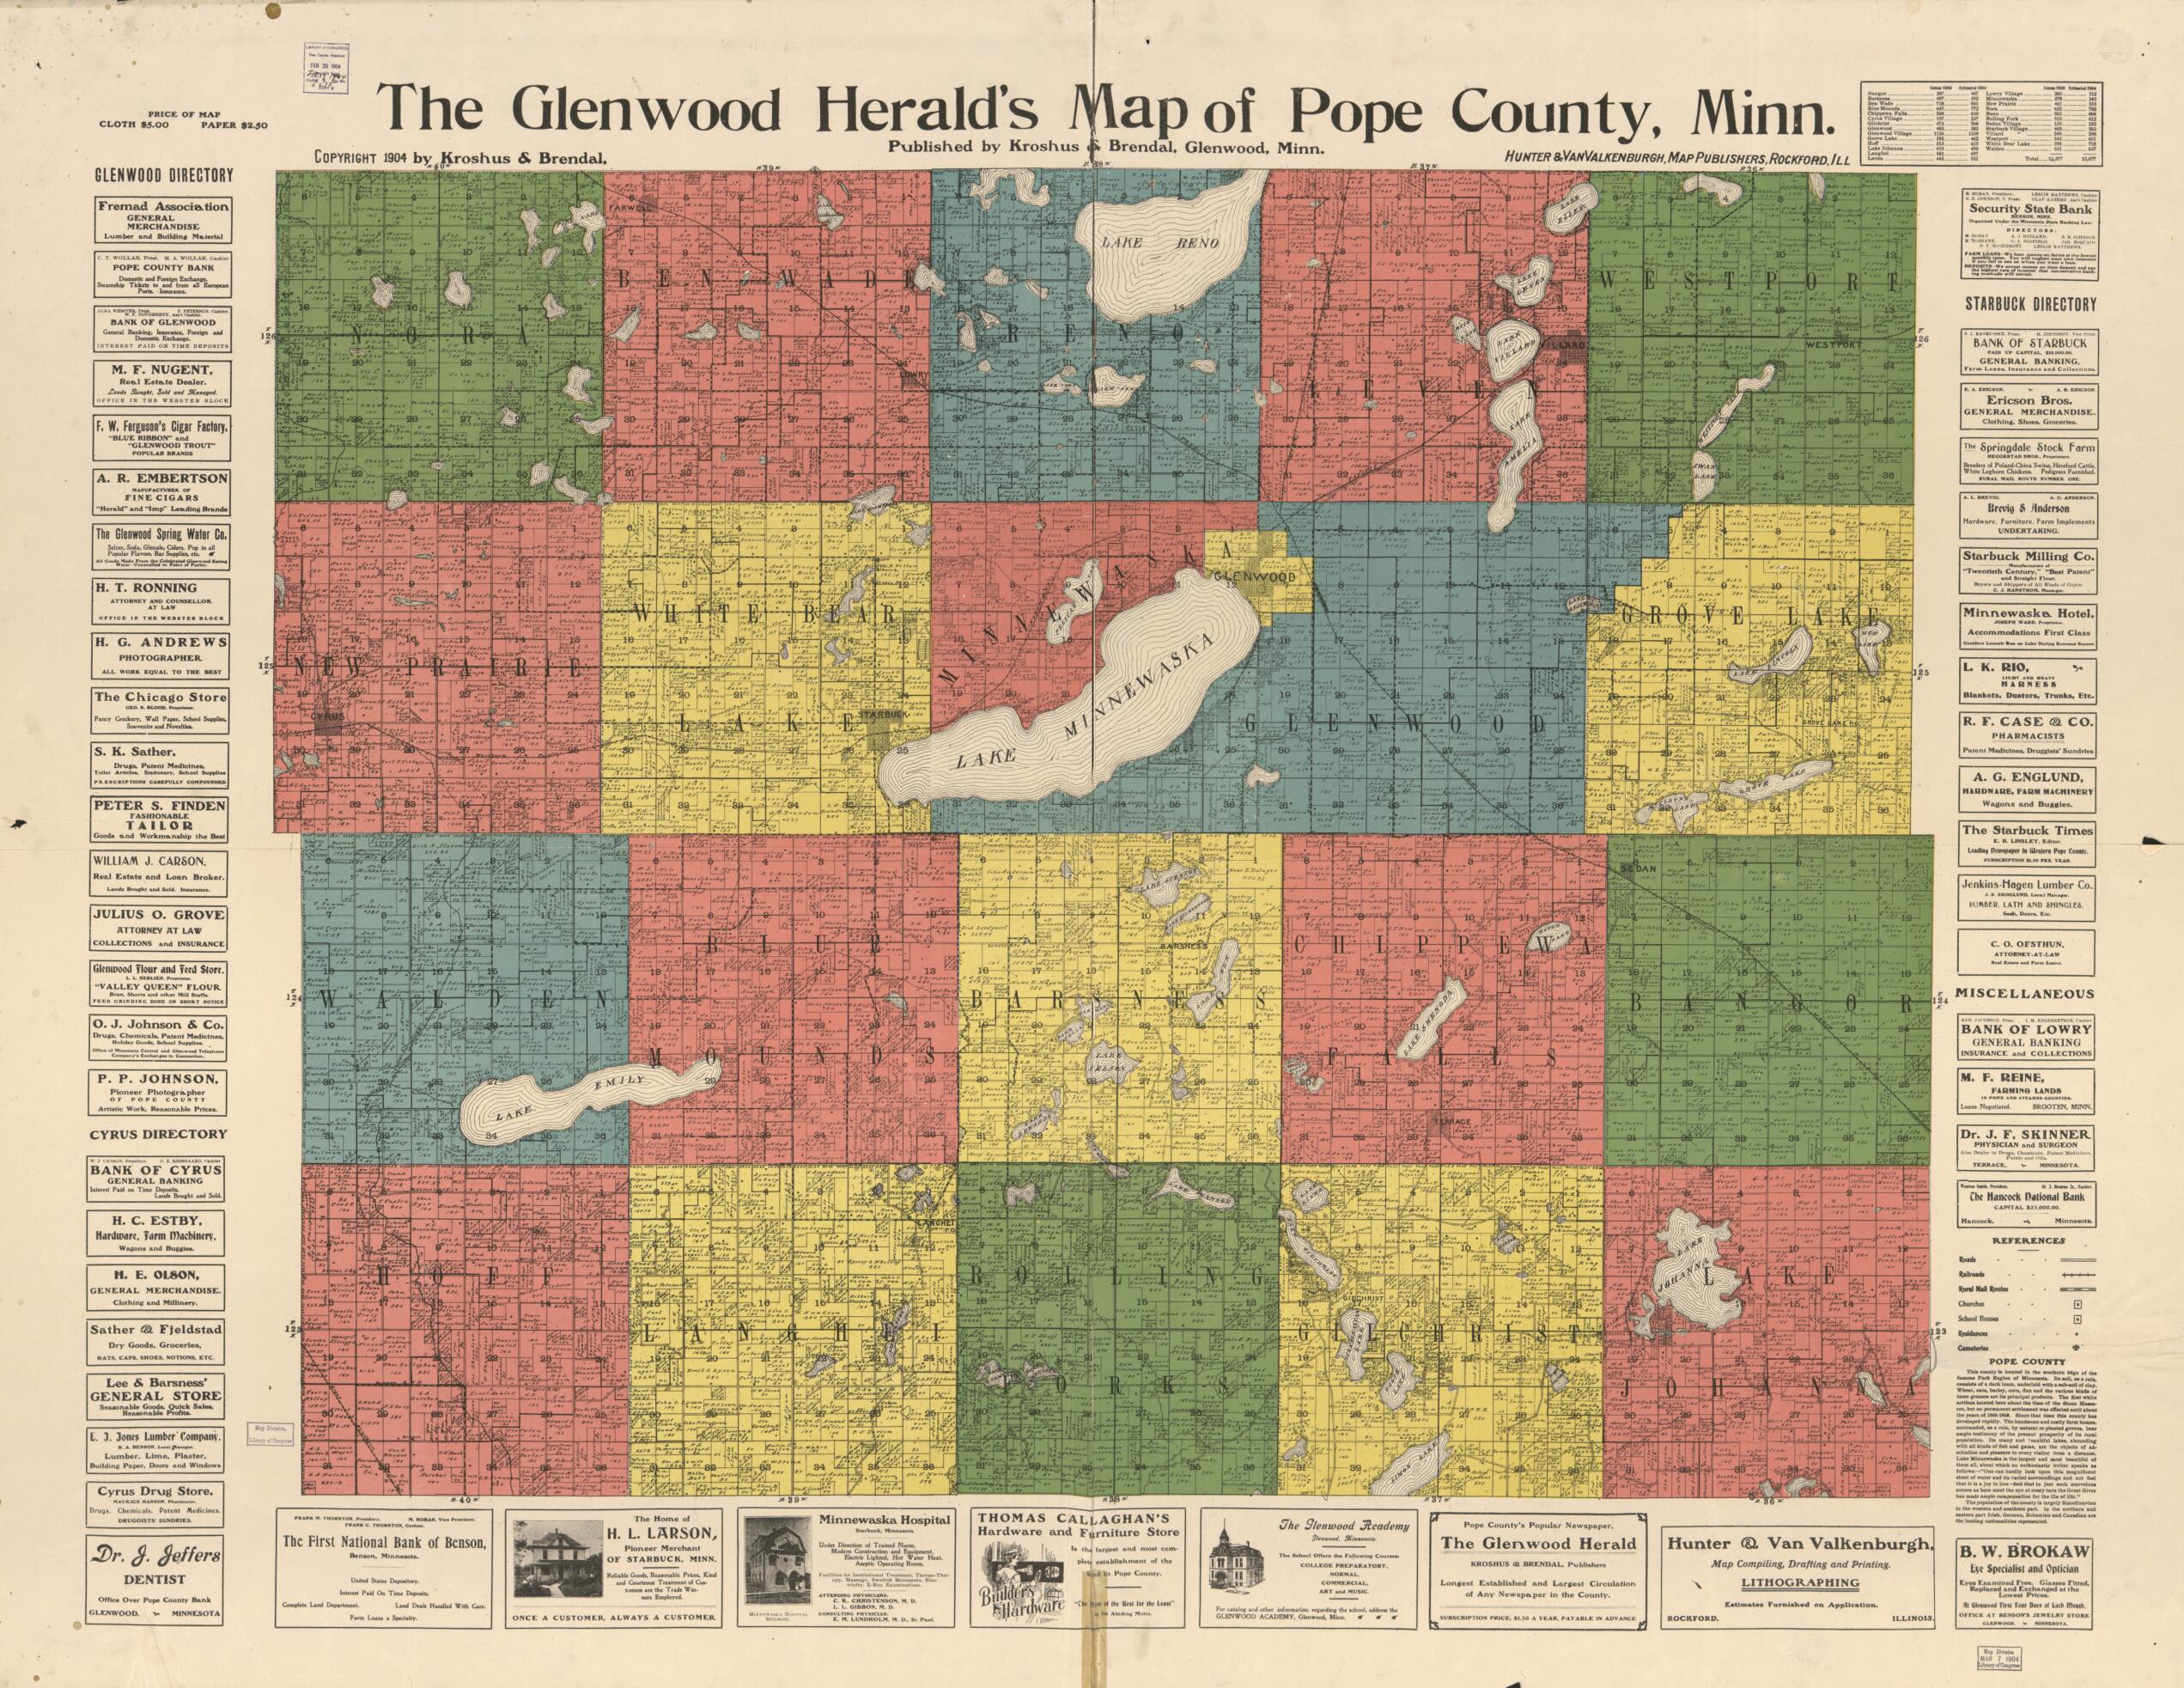 This old map of The Glenwood Herald&